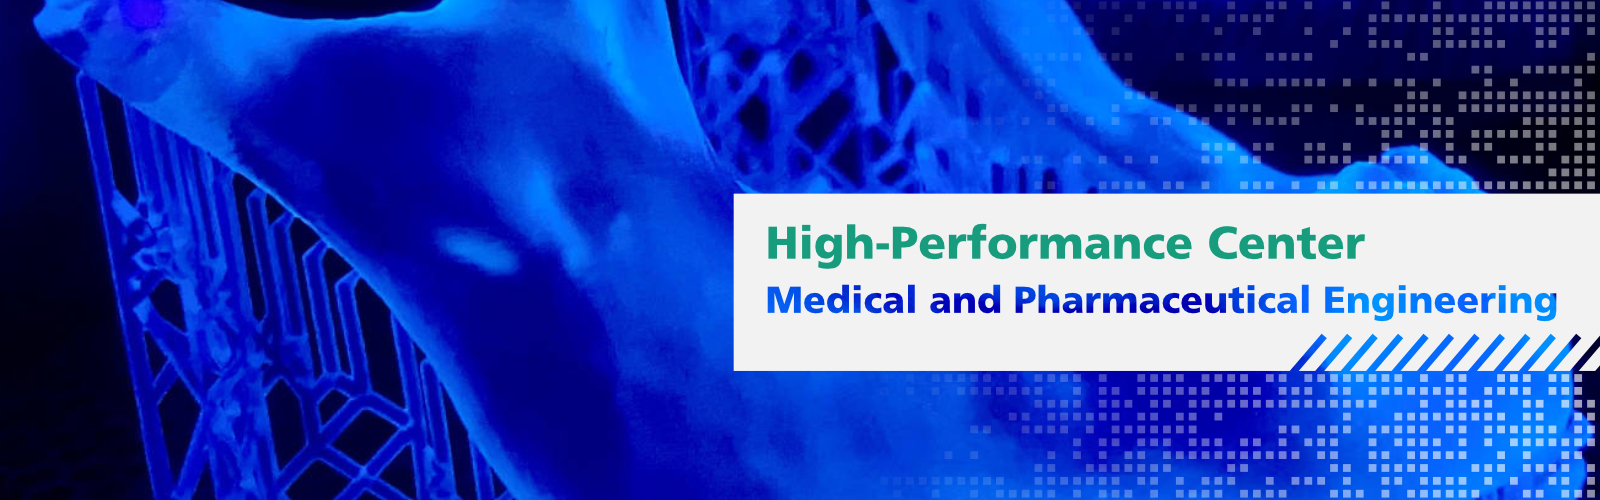 High-Performance Center Medical and Pharmaceutical Engineering